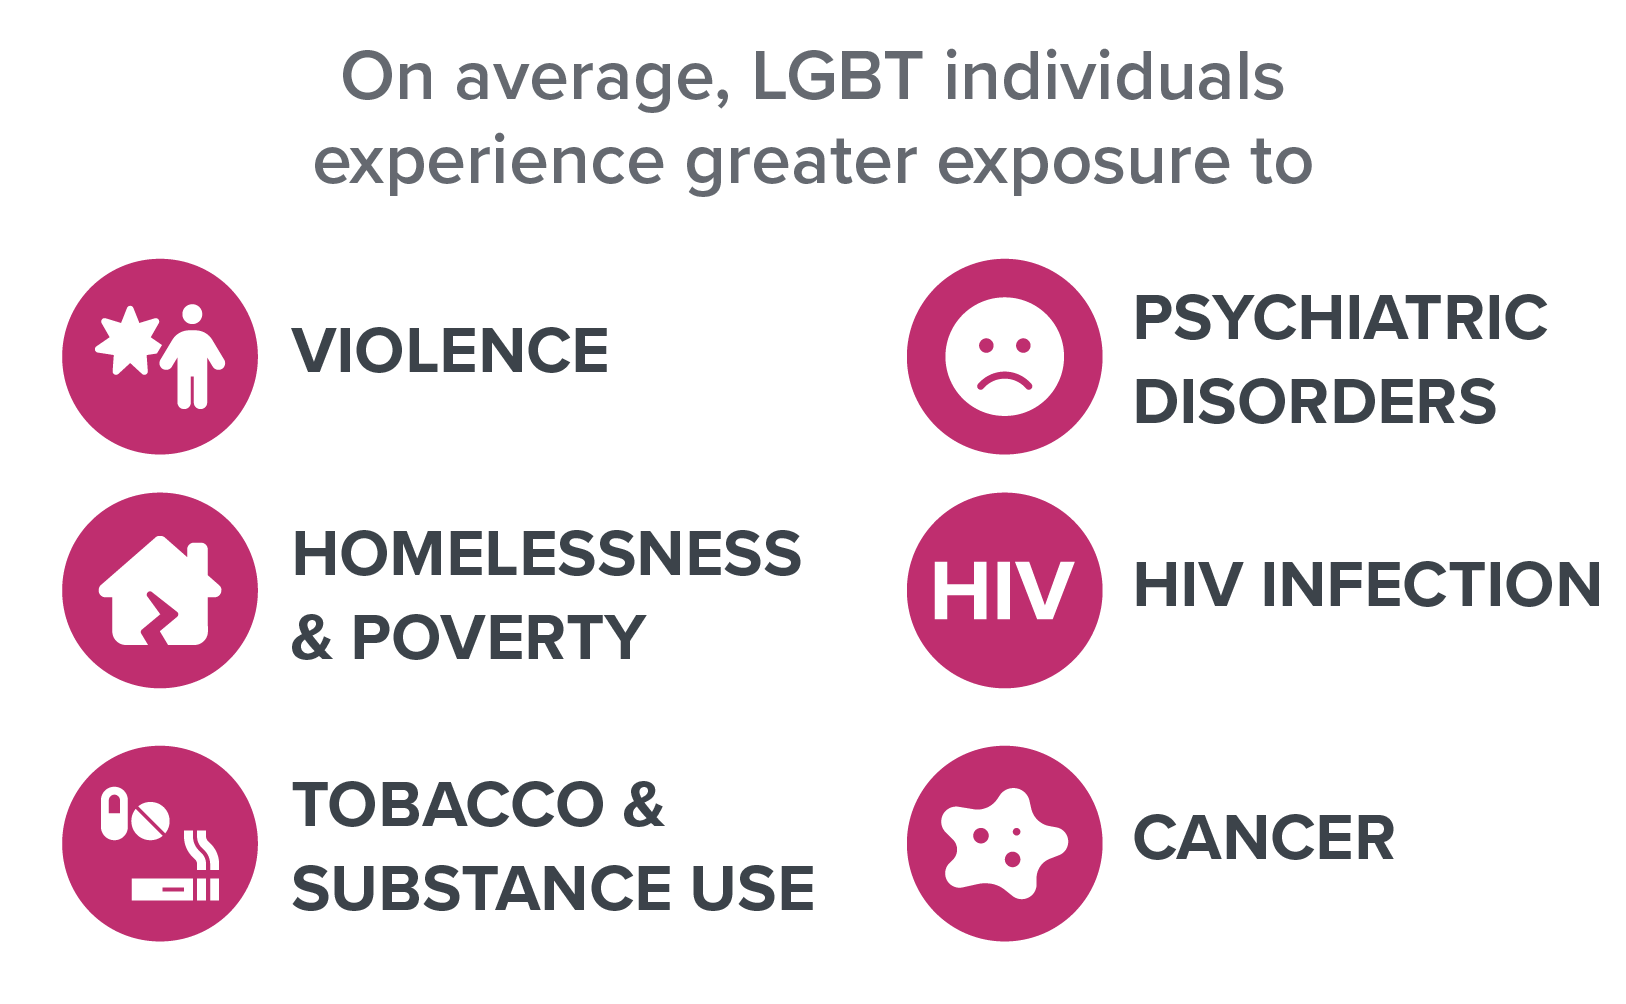 On average, LGBT individuals experience greater exposure to violence and homelessness, as well as higher rates of poverty, tobacco and substance use, psychiatric disorders, HIV infection, and cancer.